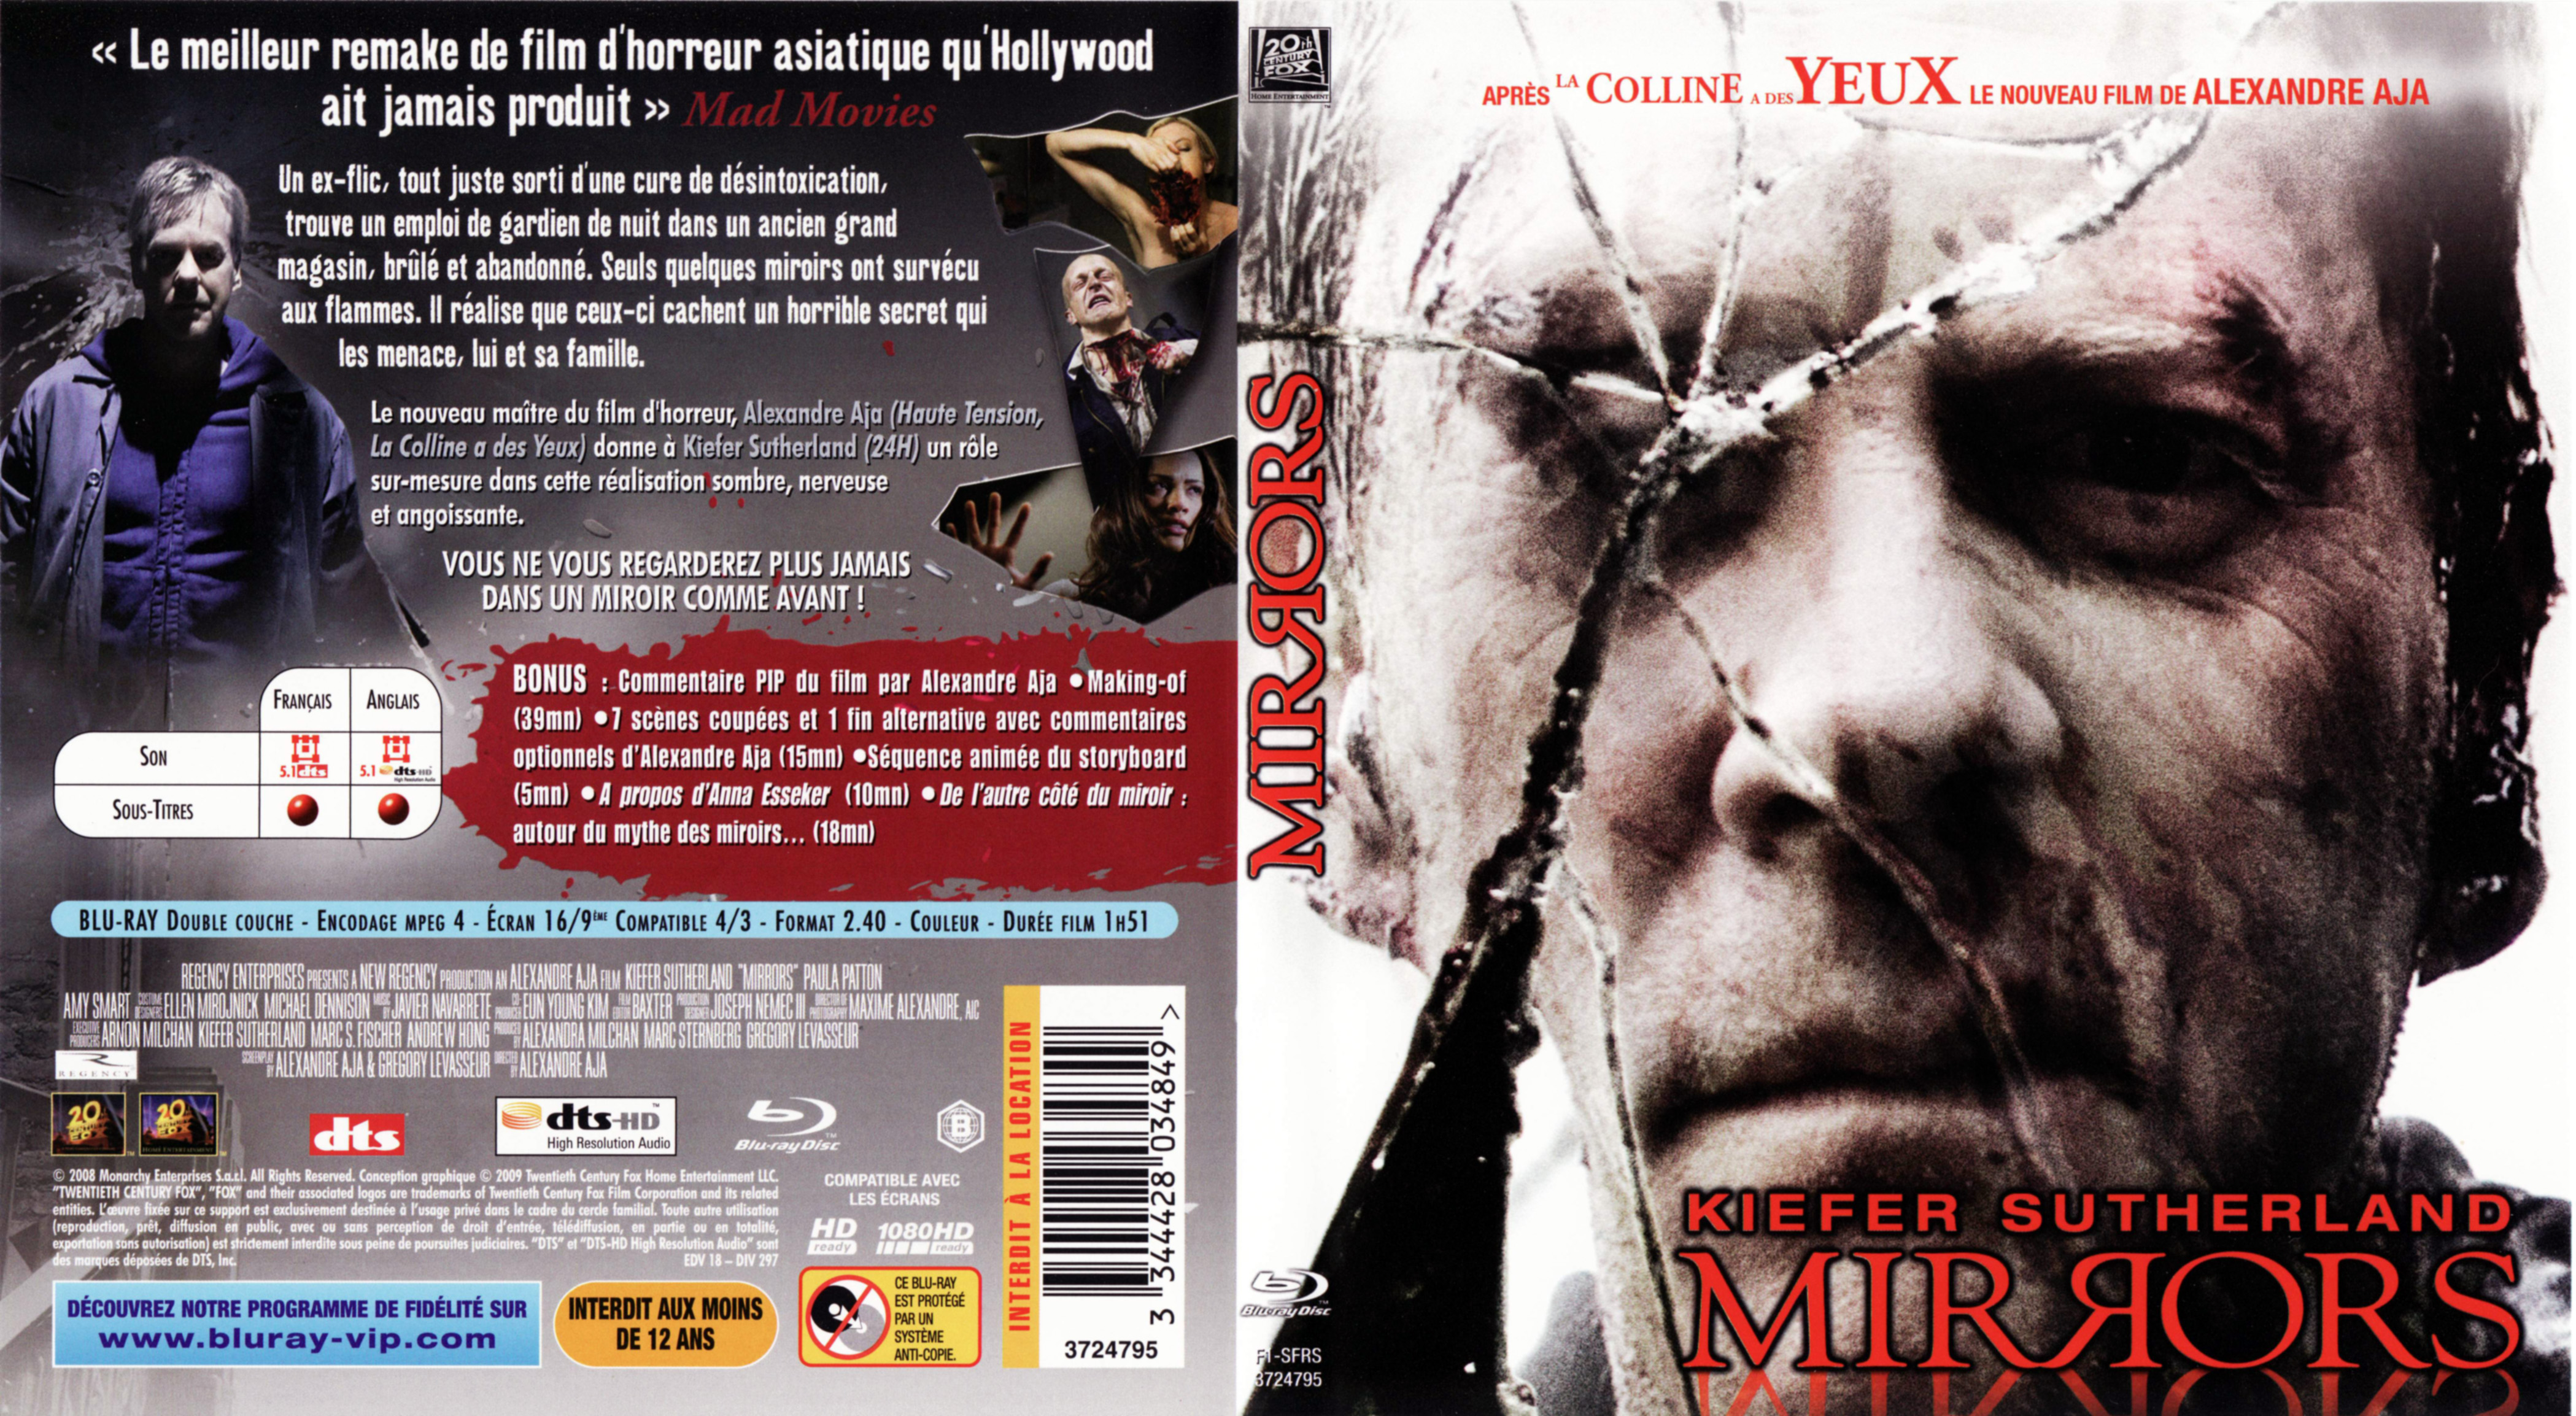 Jaquette DVD Mirrors (BLU-RAY)